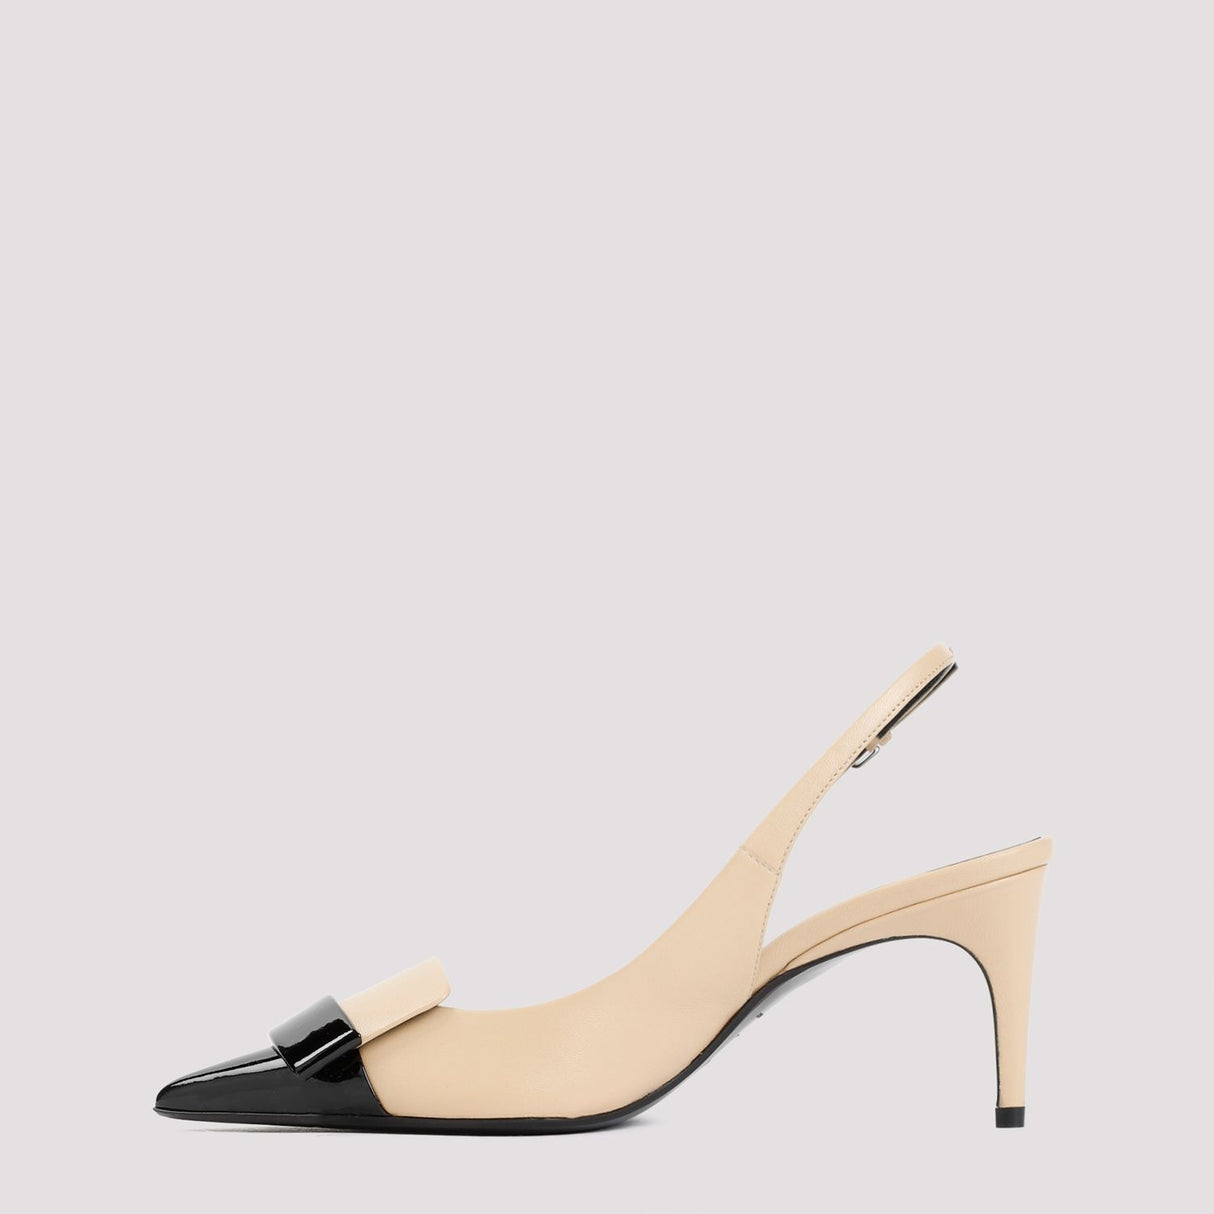 SERGIO ROSSI Nude Slingback Pumps for Women - 9cm Leather Heels